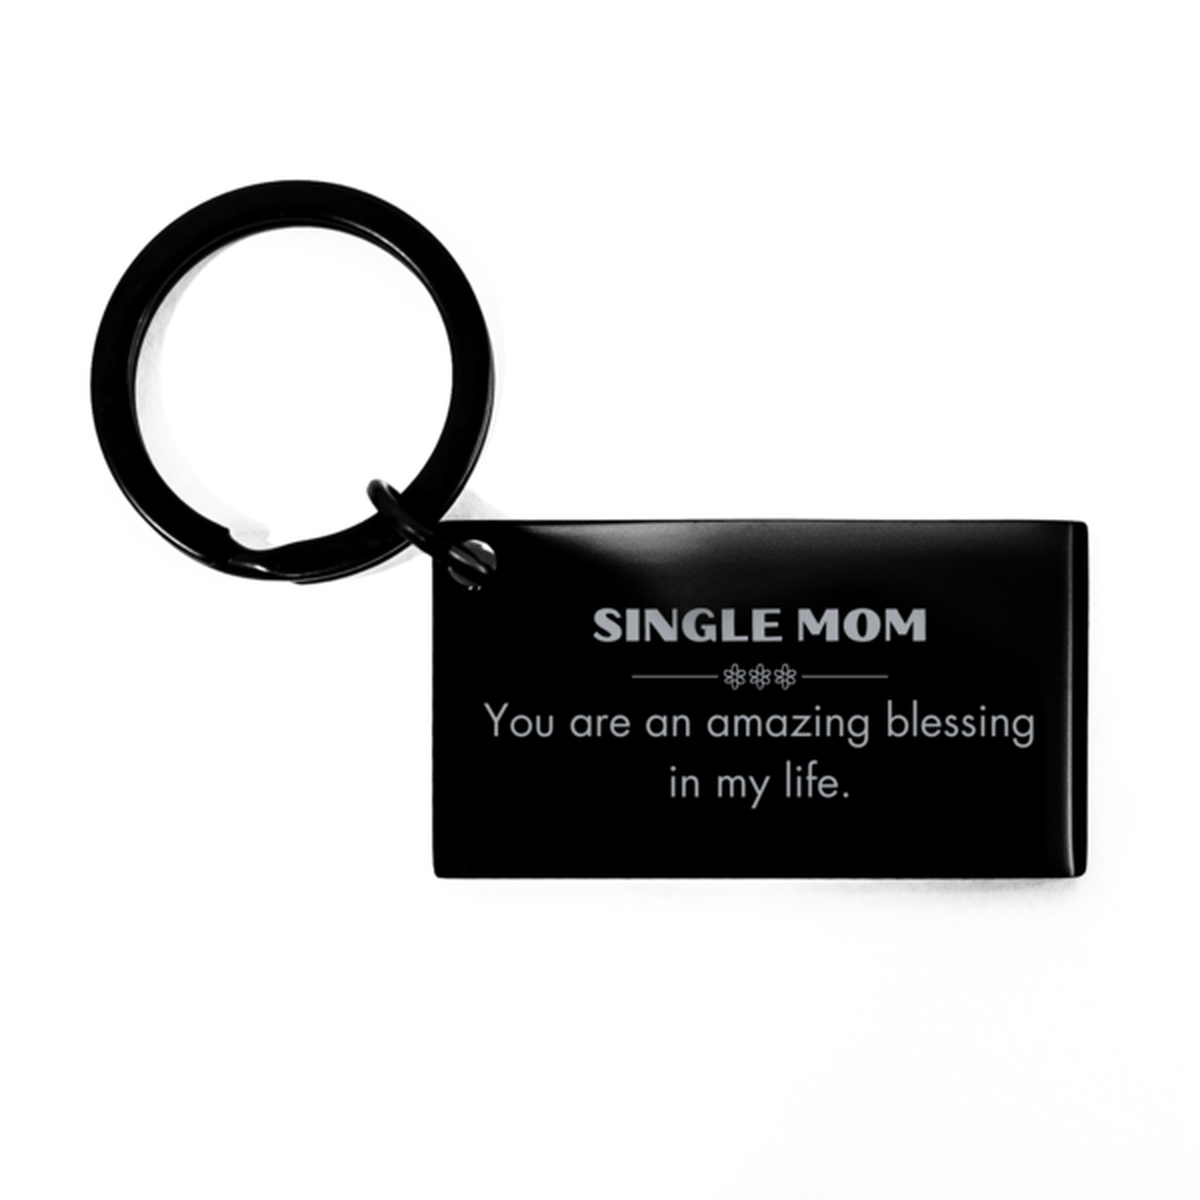 Single Mom Keychain, You are an amazing blessing in my life, Thank You Gifts For Single Mom, Inspirational Birthday Christmas Unique Gifts For Single Mom